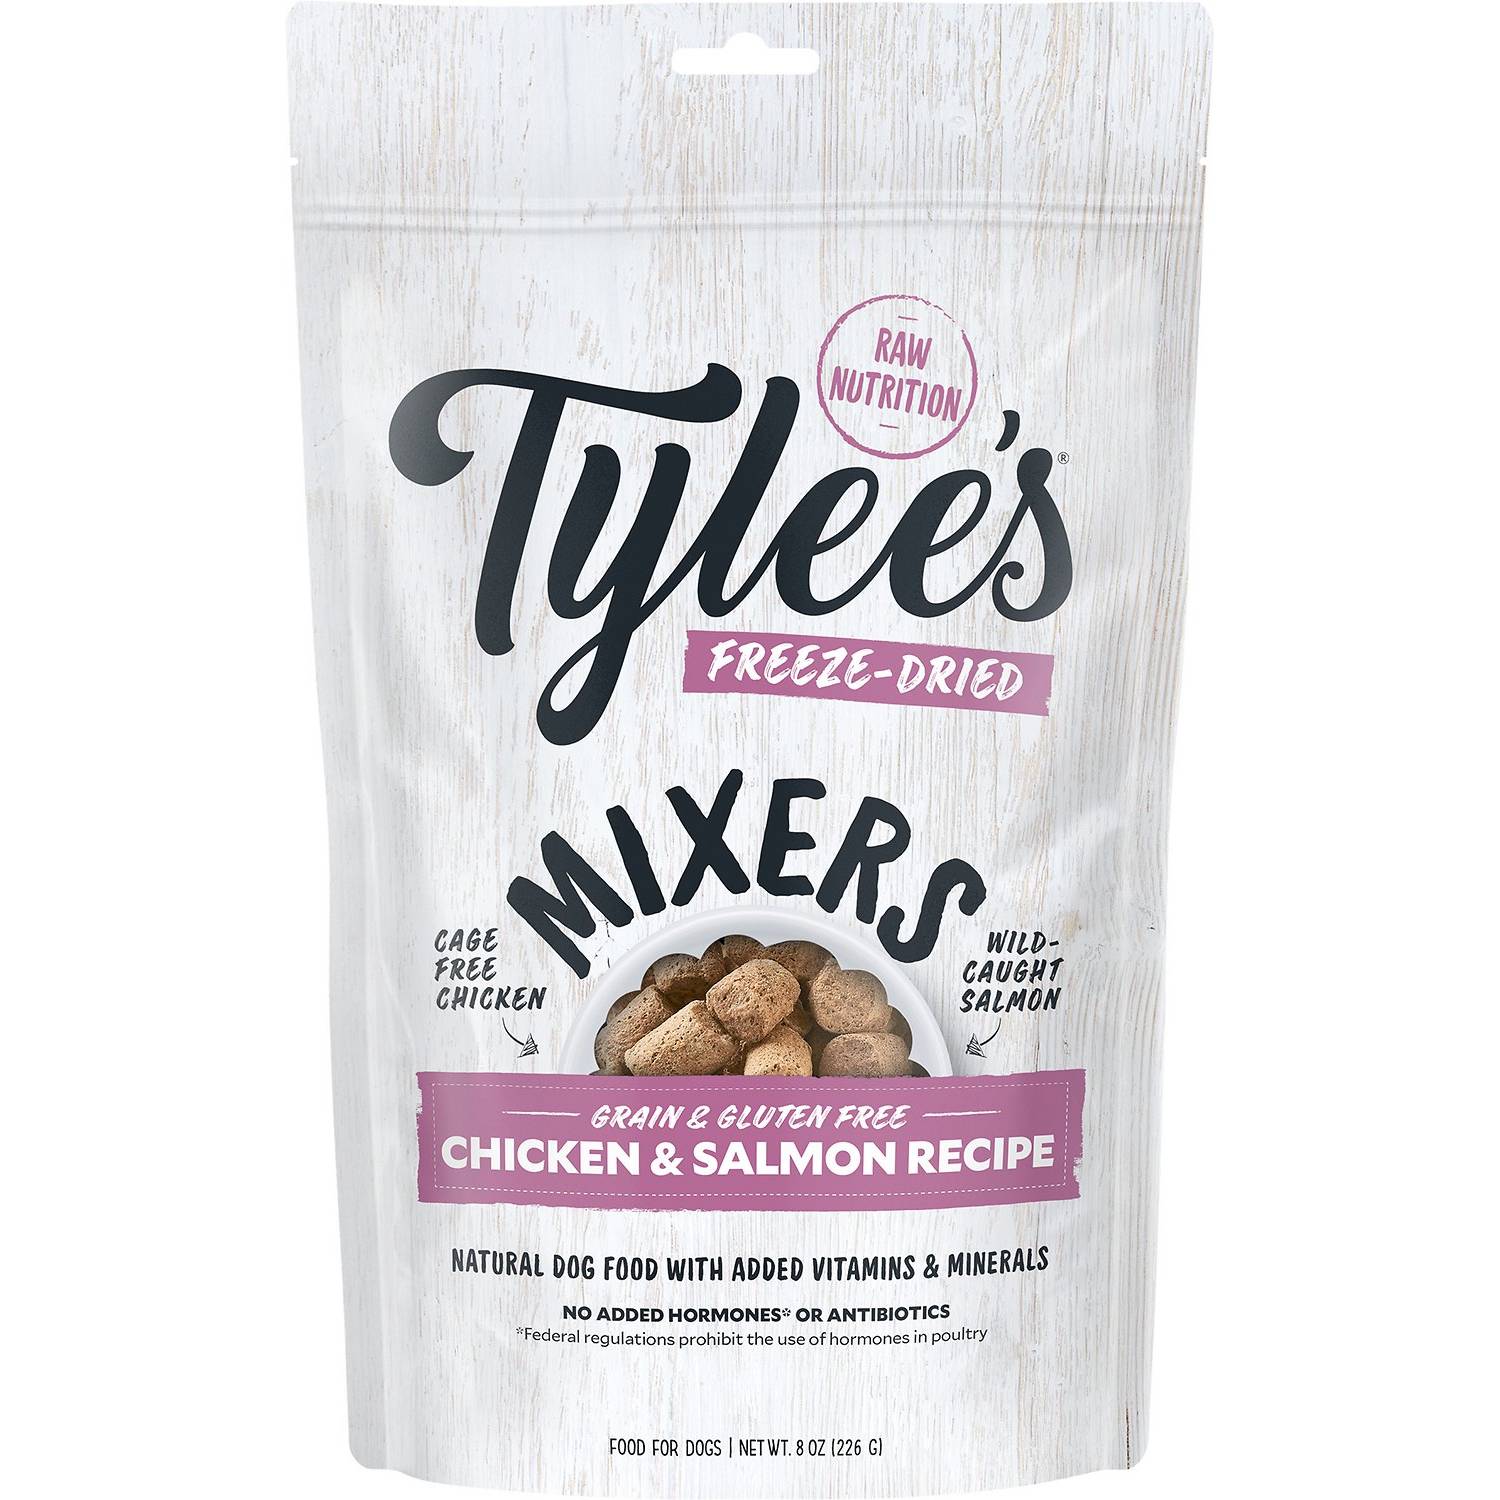 Tylee’s Freeze-Dried Mixers for Dogs (1)